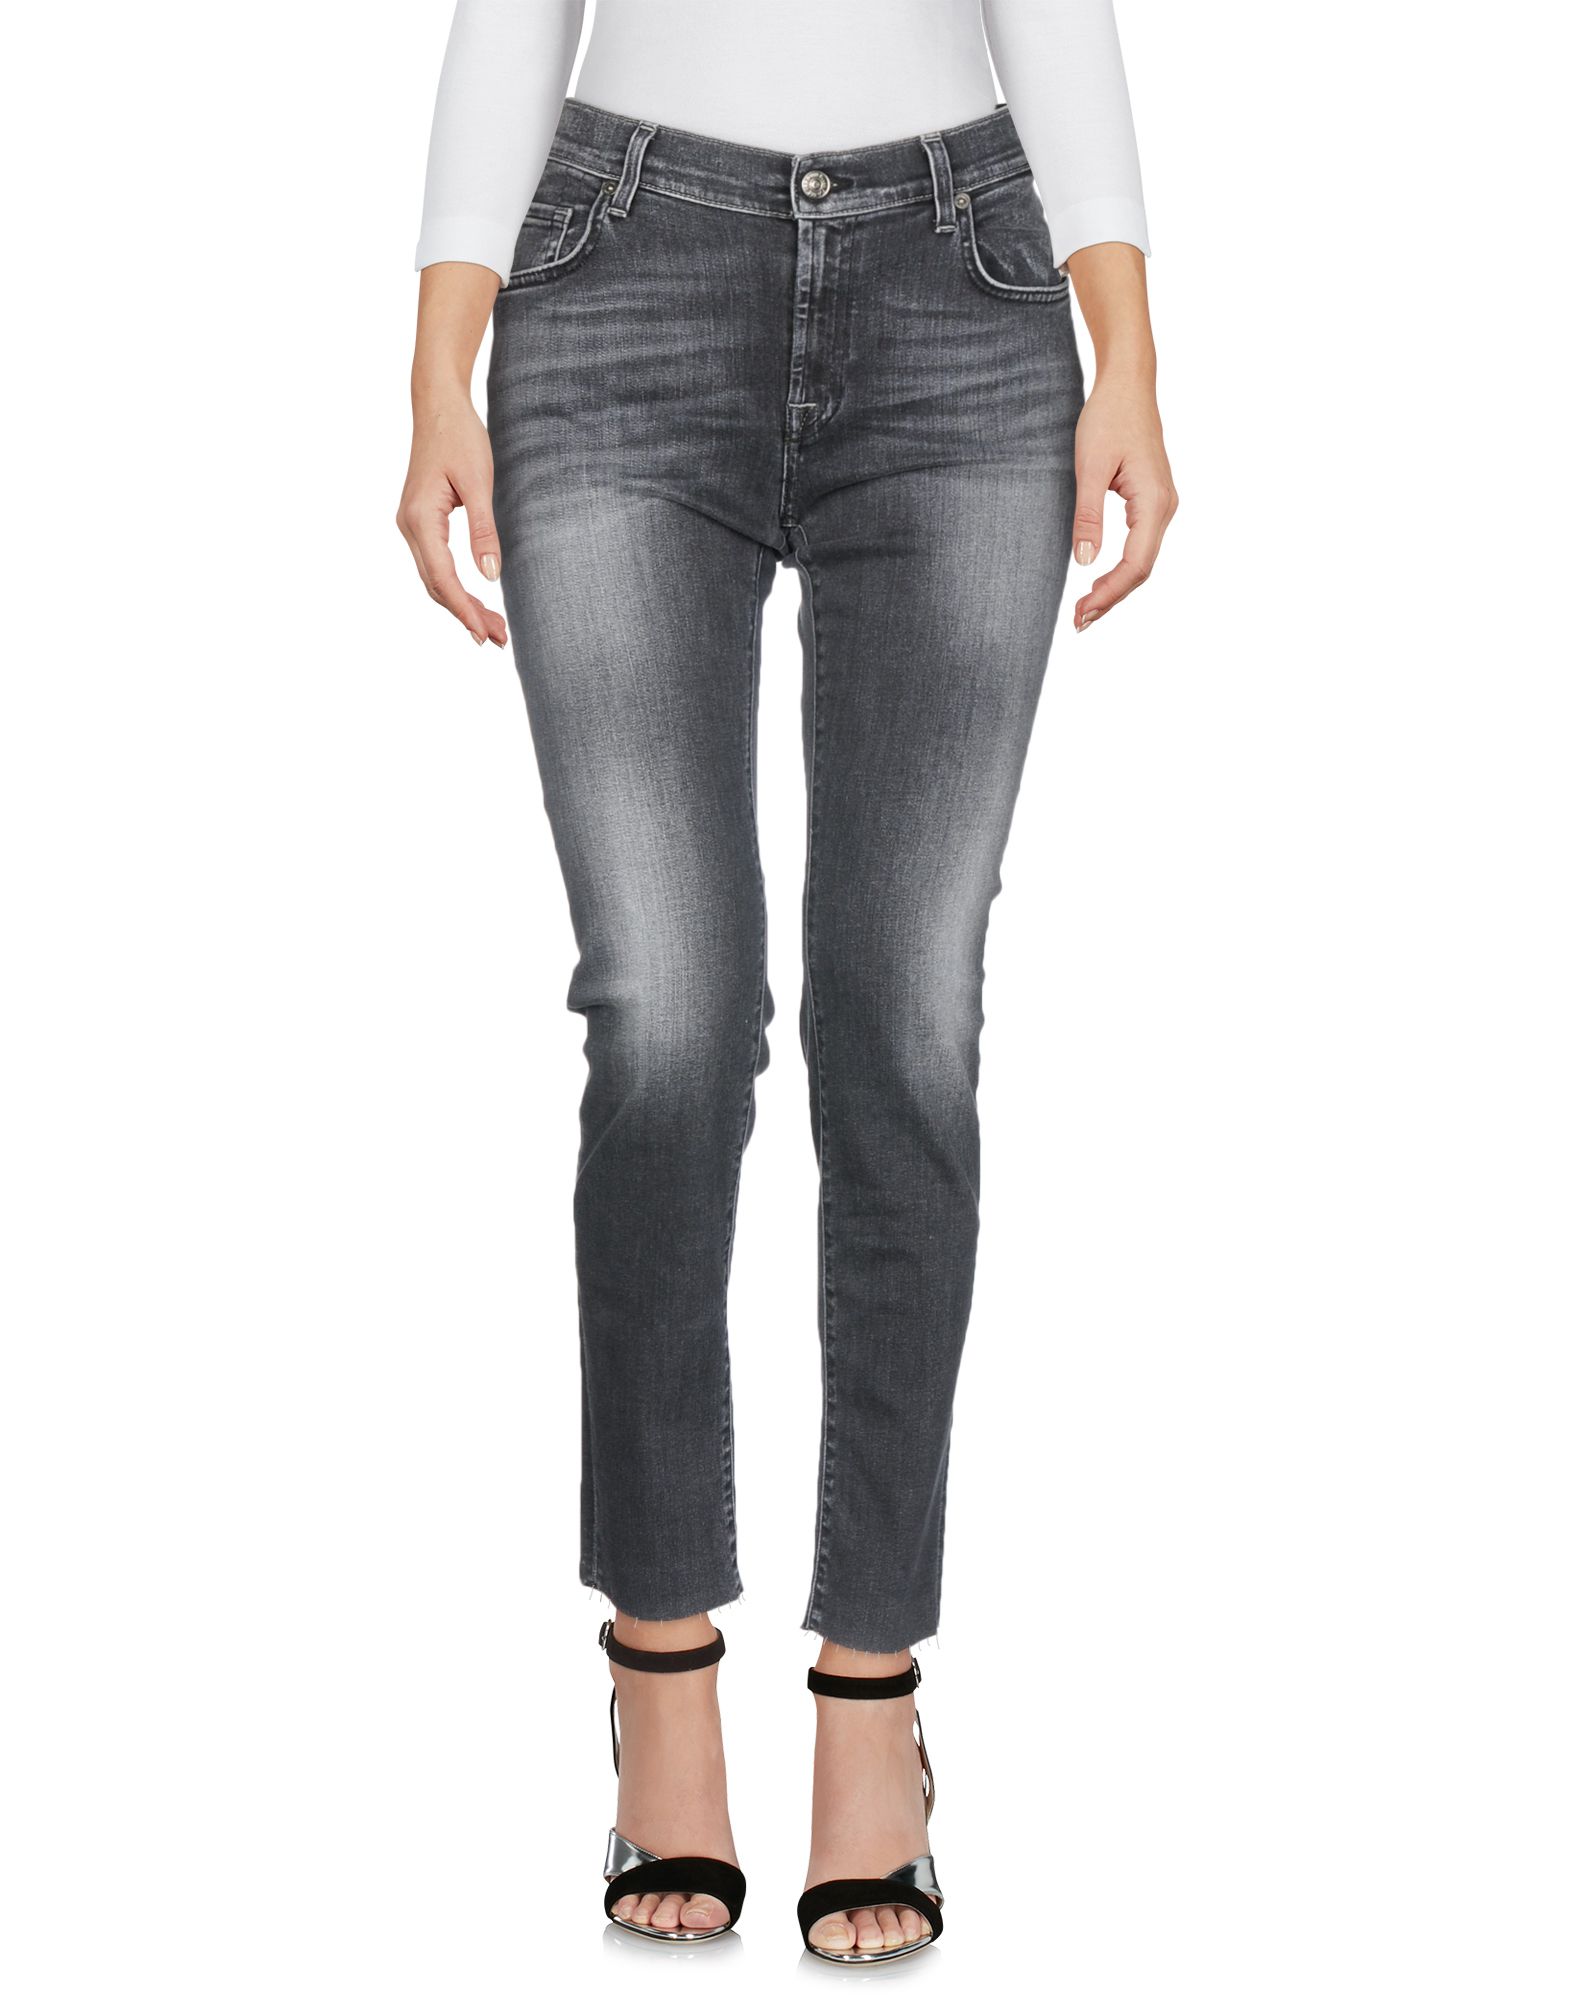 7 FOR ALL MANKIND Denim pants,42671606MH 4